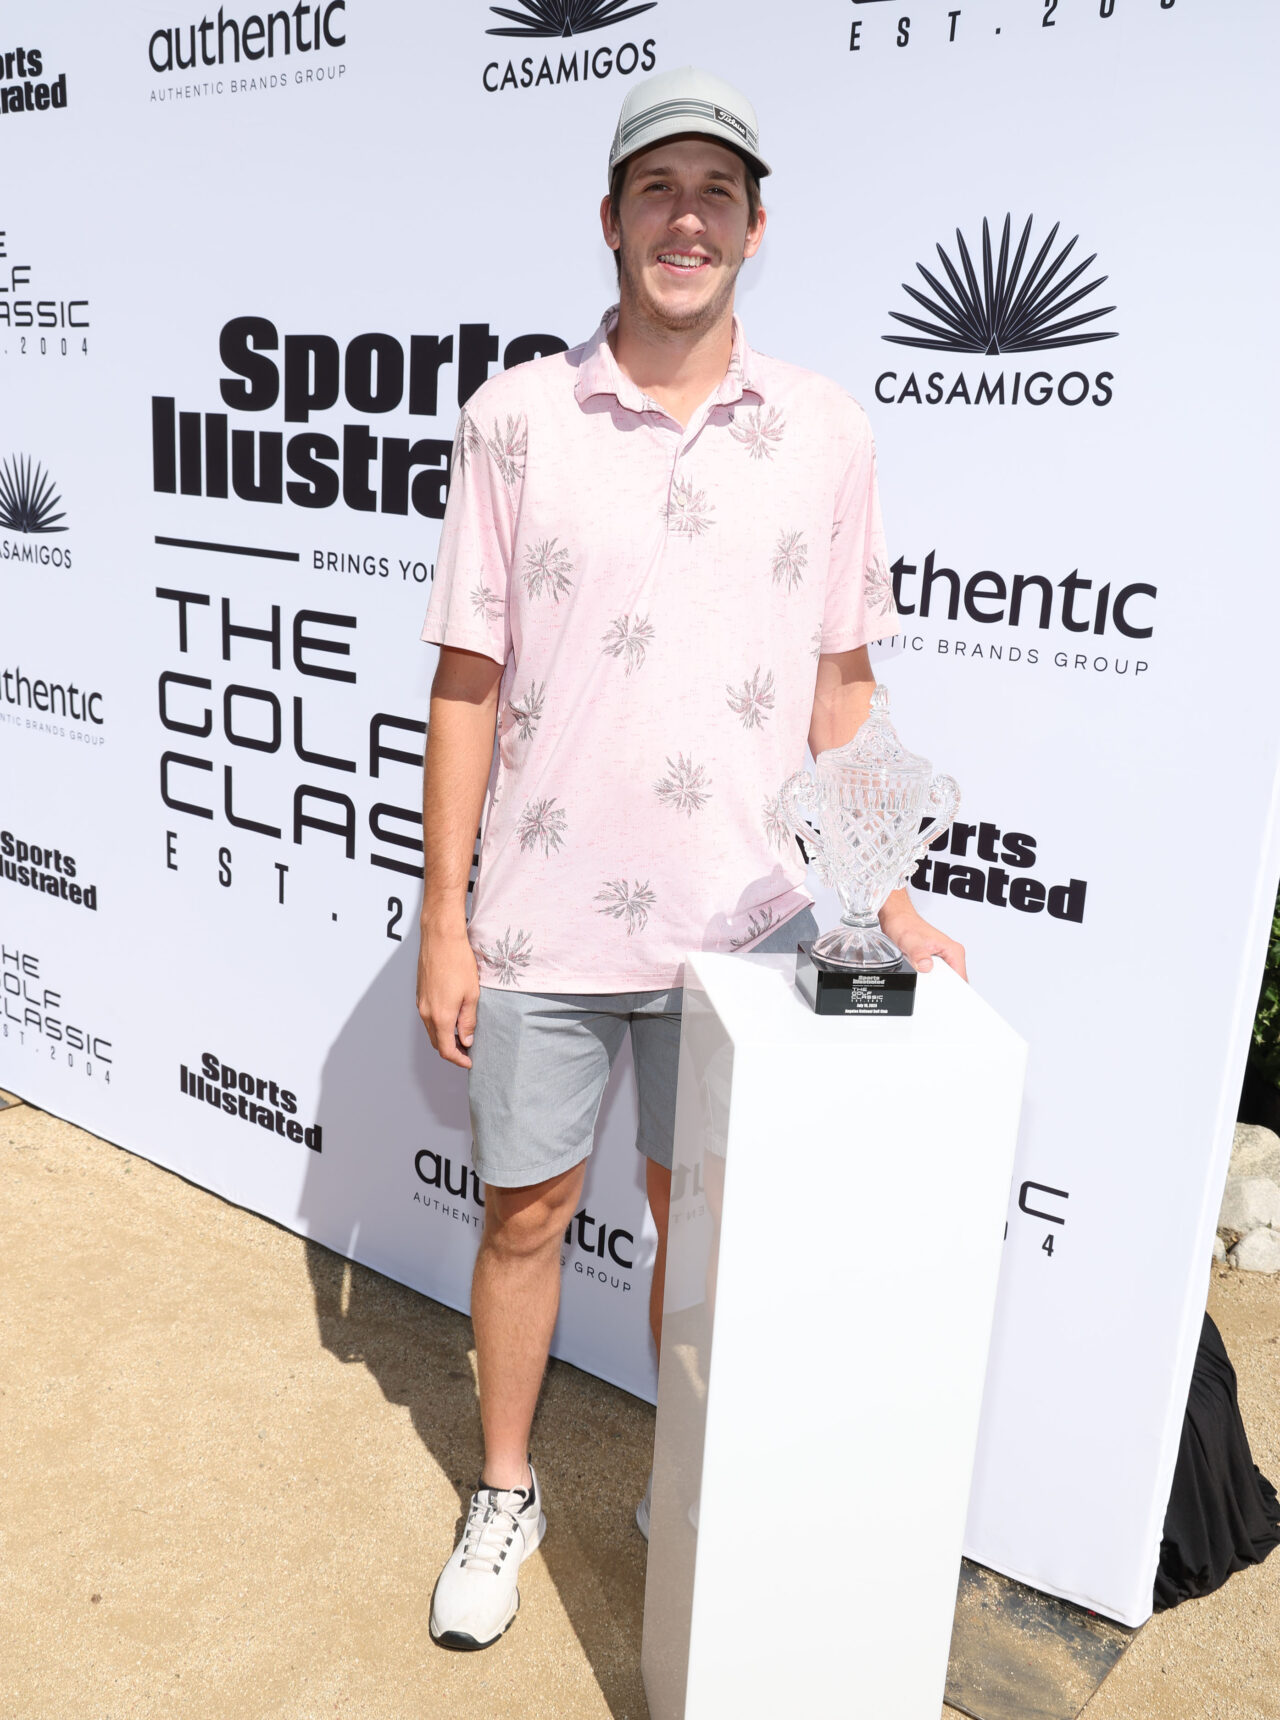 ENTER and Sports Illustrated’s Golf Classic was a Hit